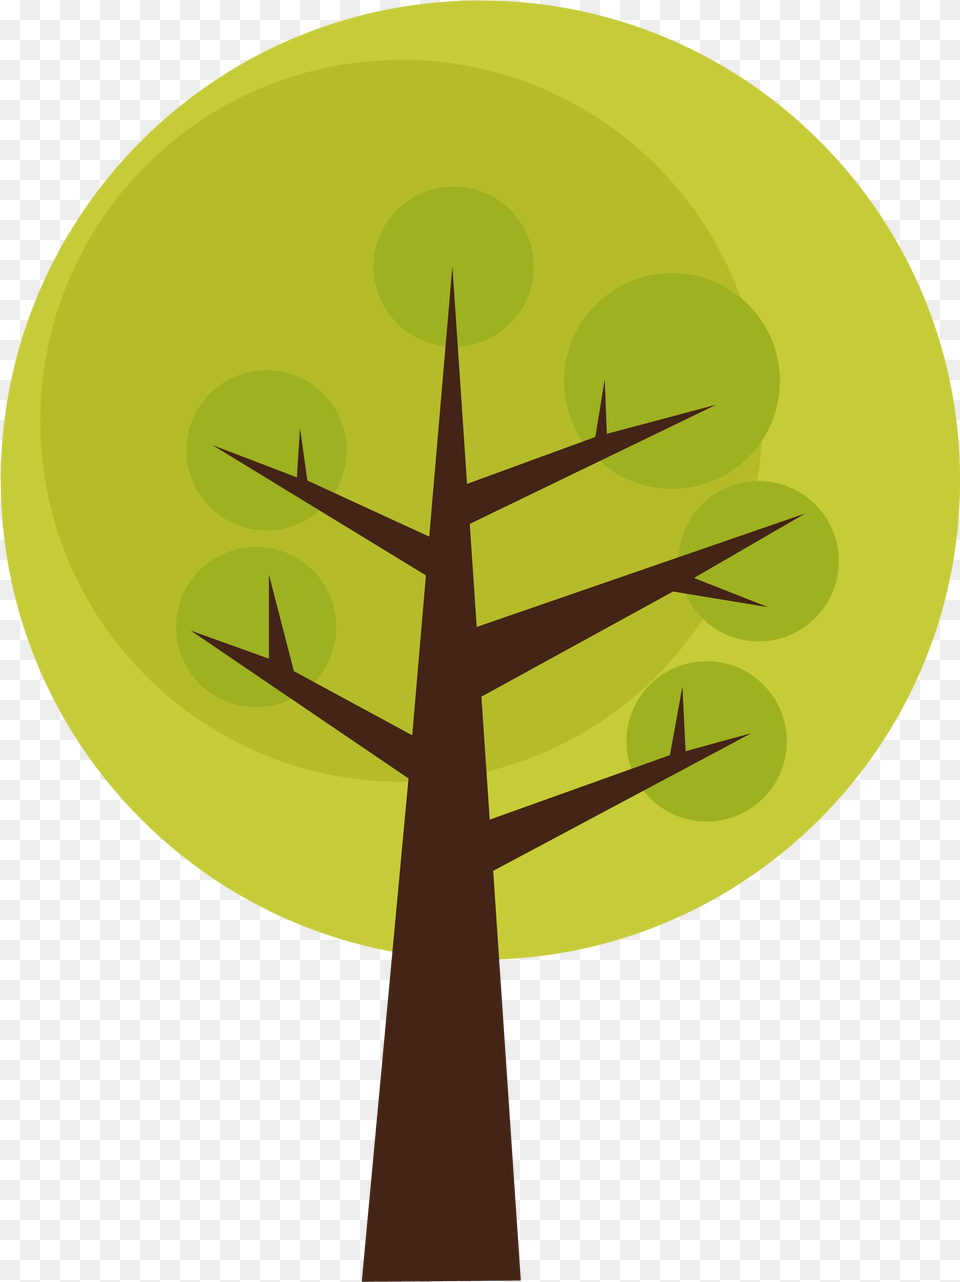 Tree Images Quality Tree Clip Art Hd Png Image